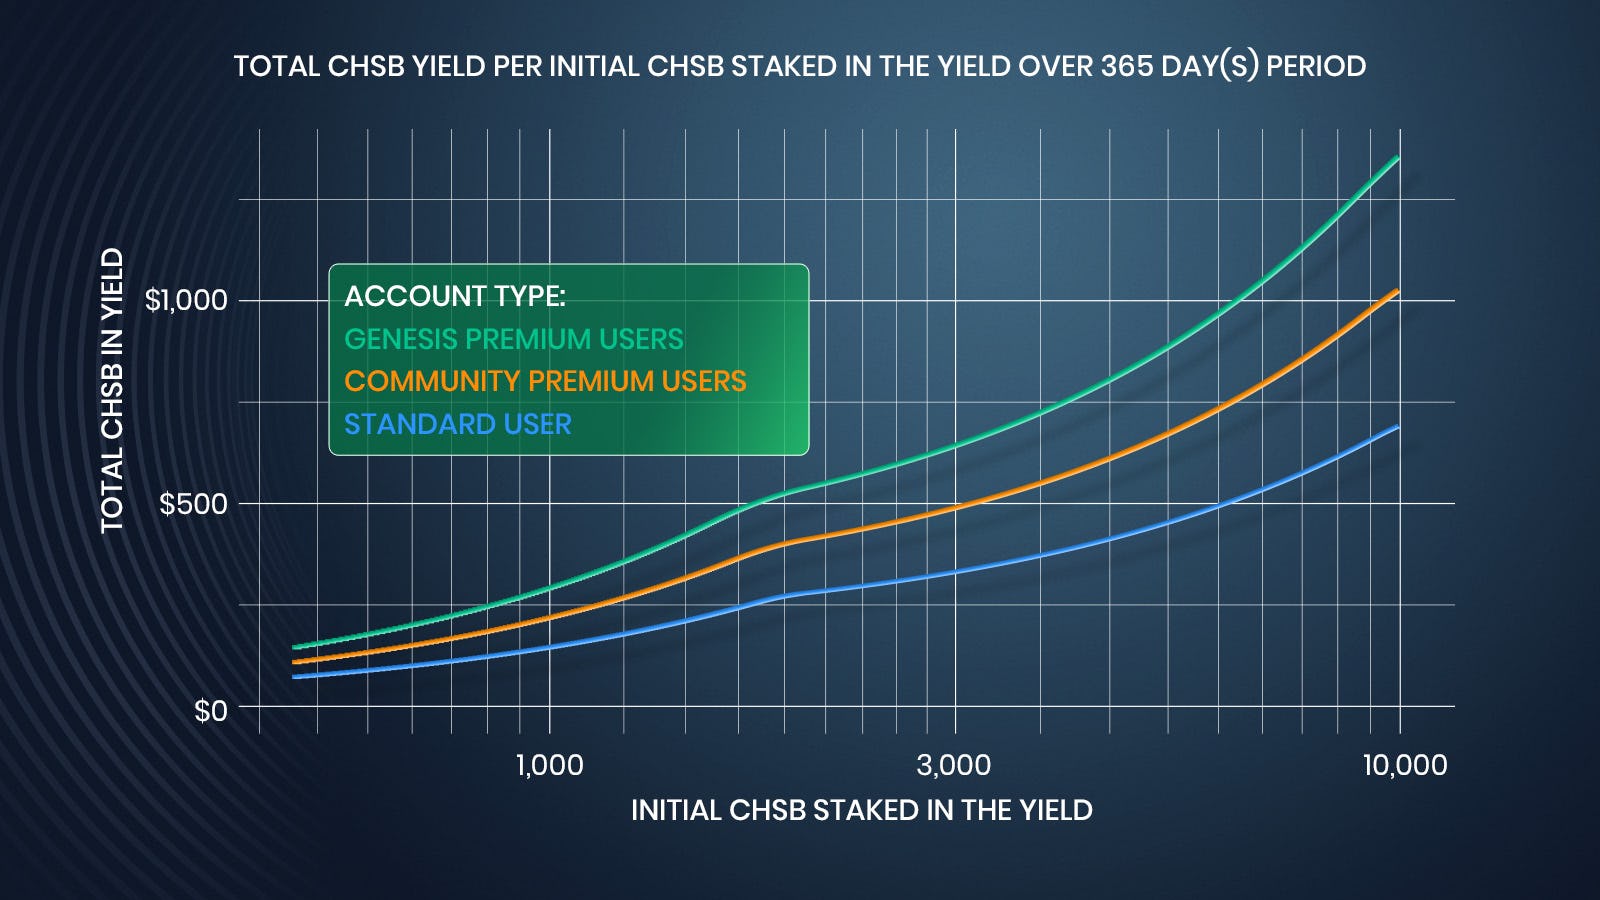 CHSB staked in the Yield over 365 day(s) period.